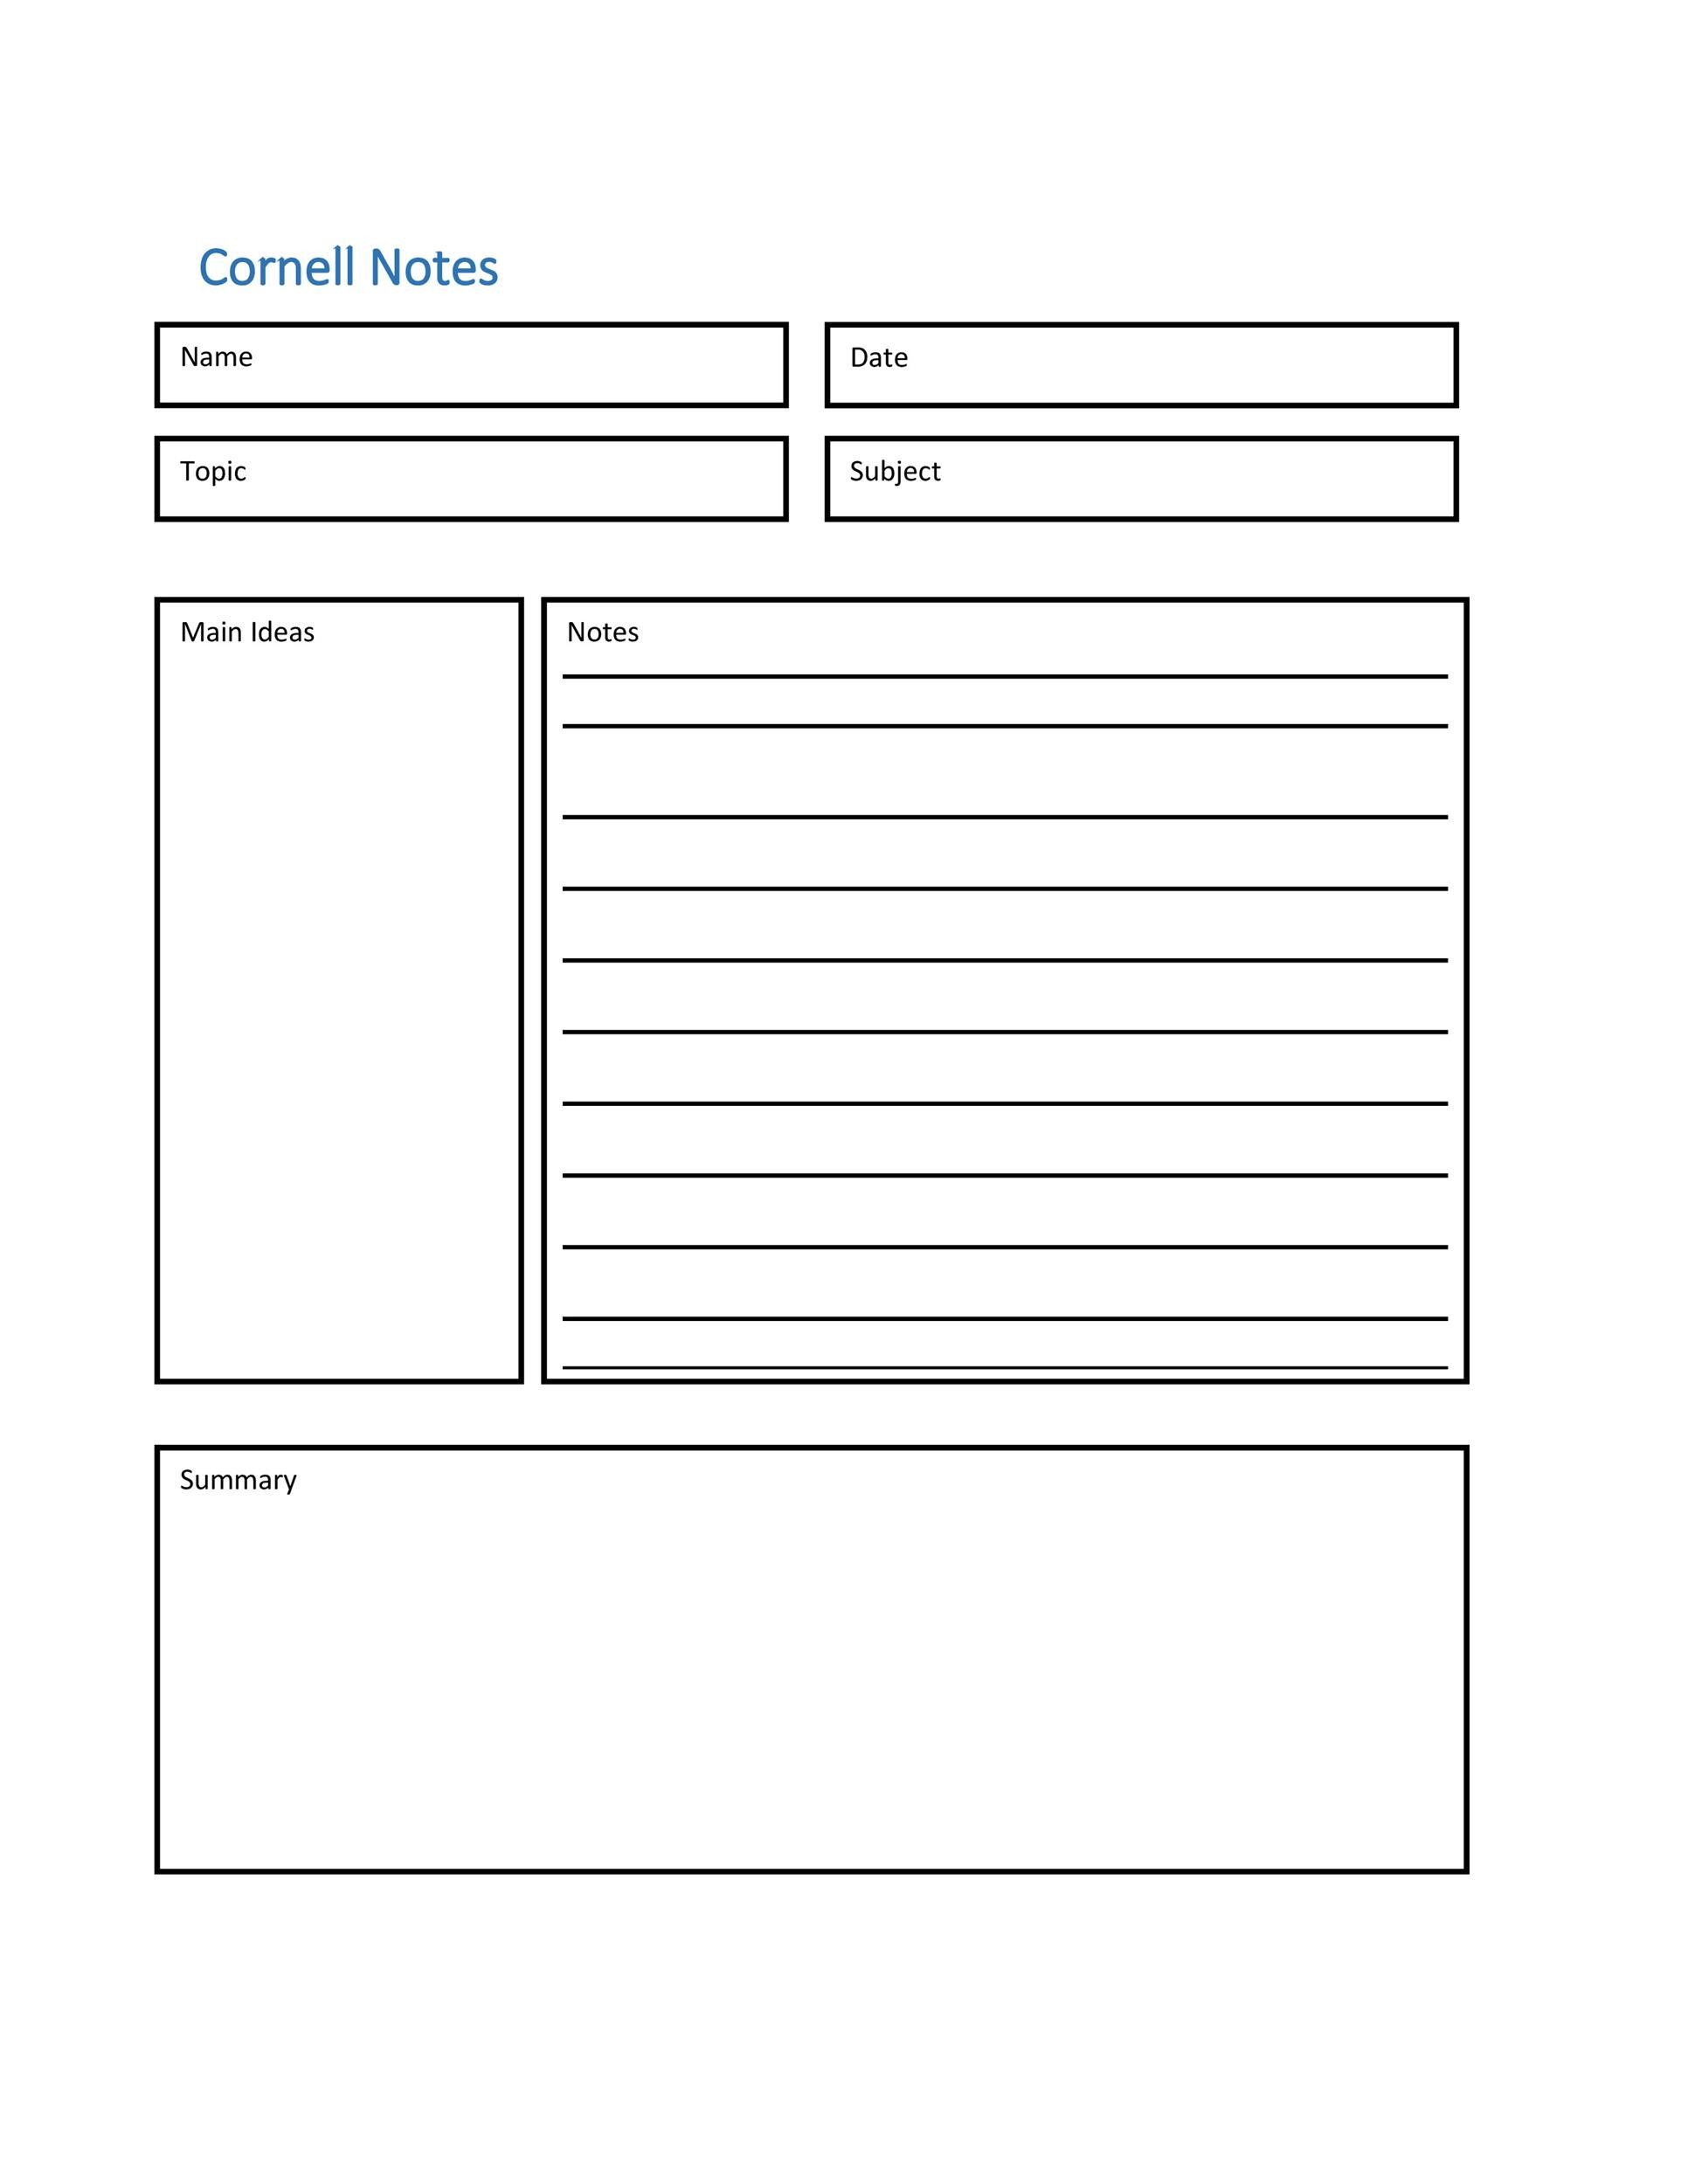 cornell note pdf For Cornell Note Template Word